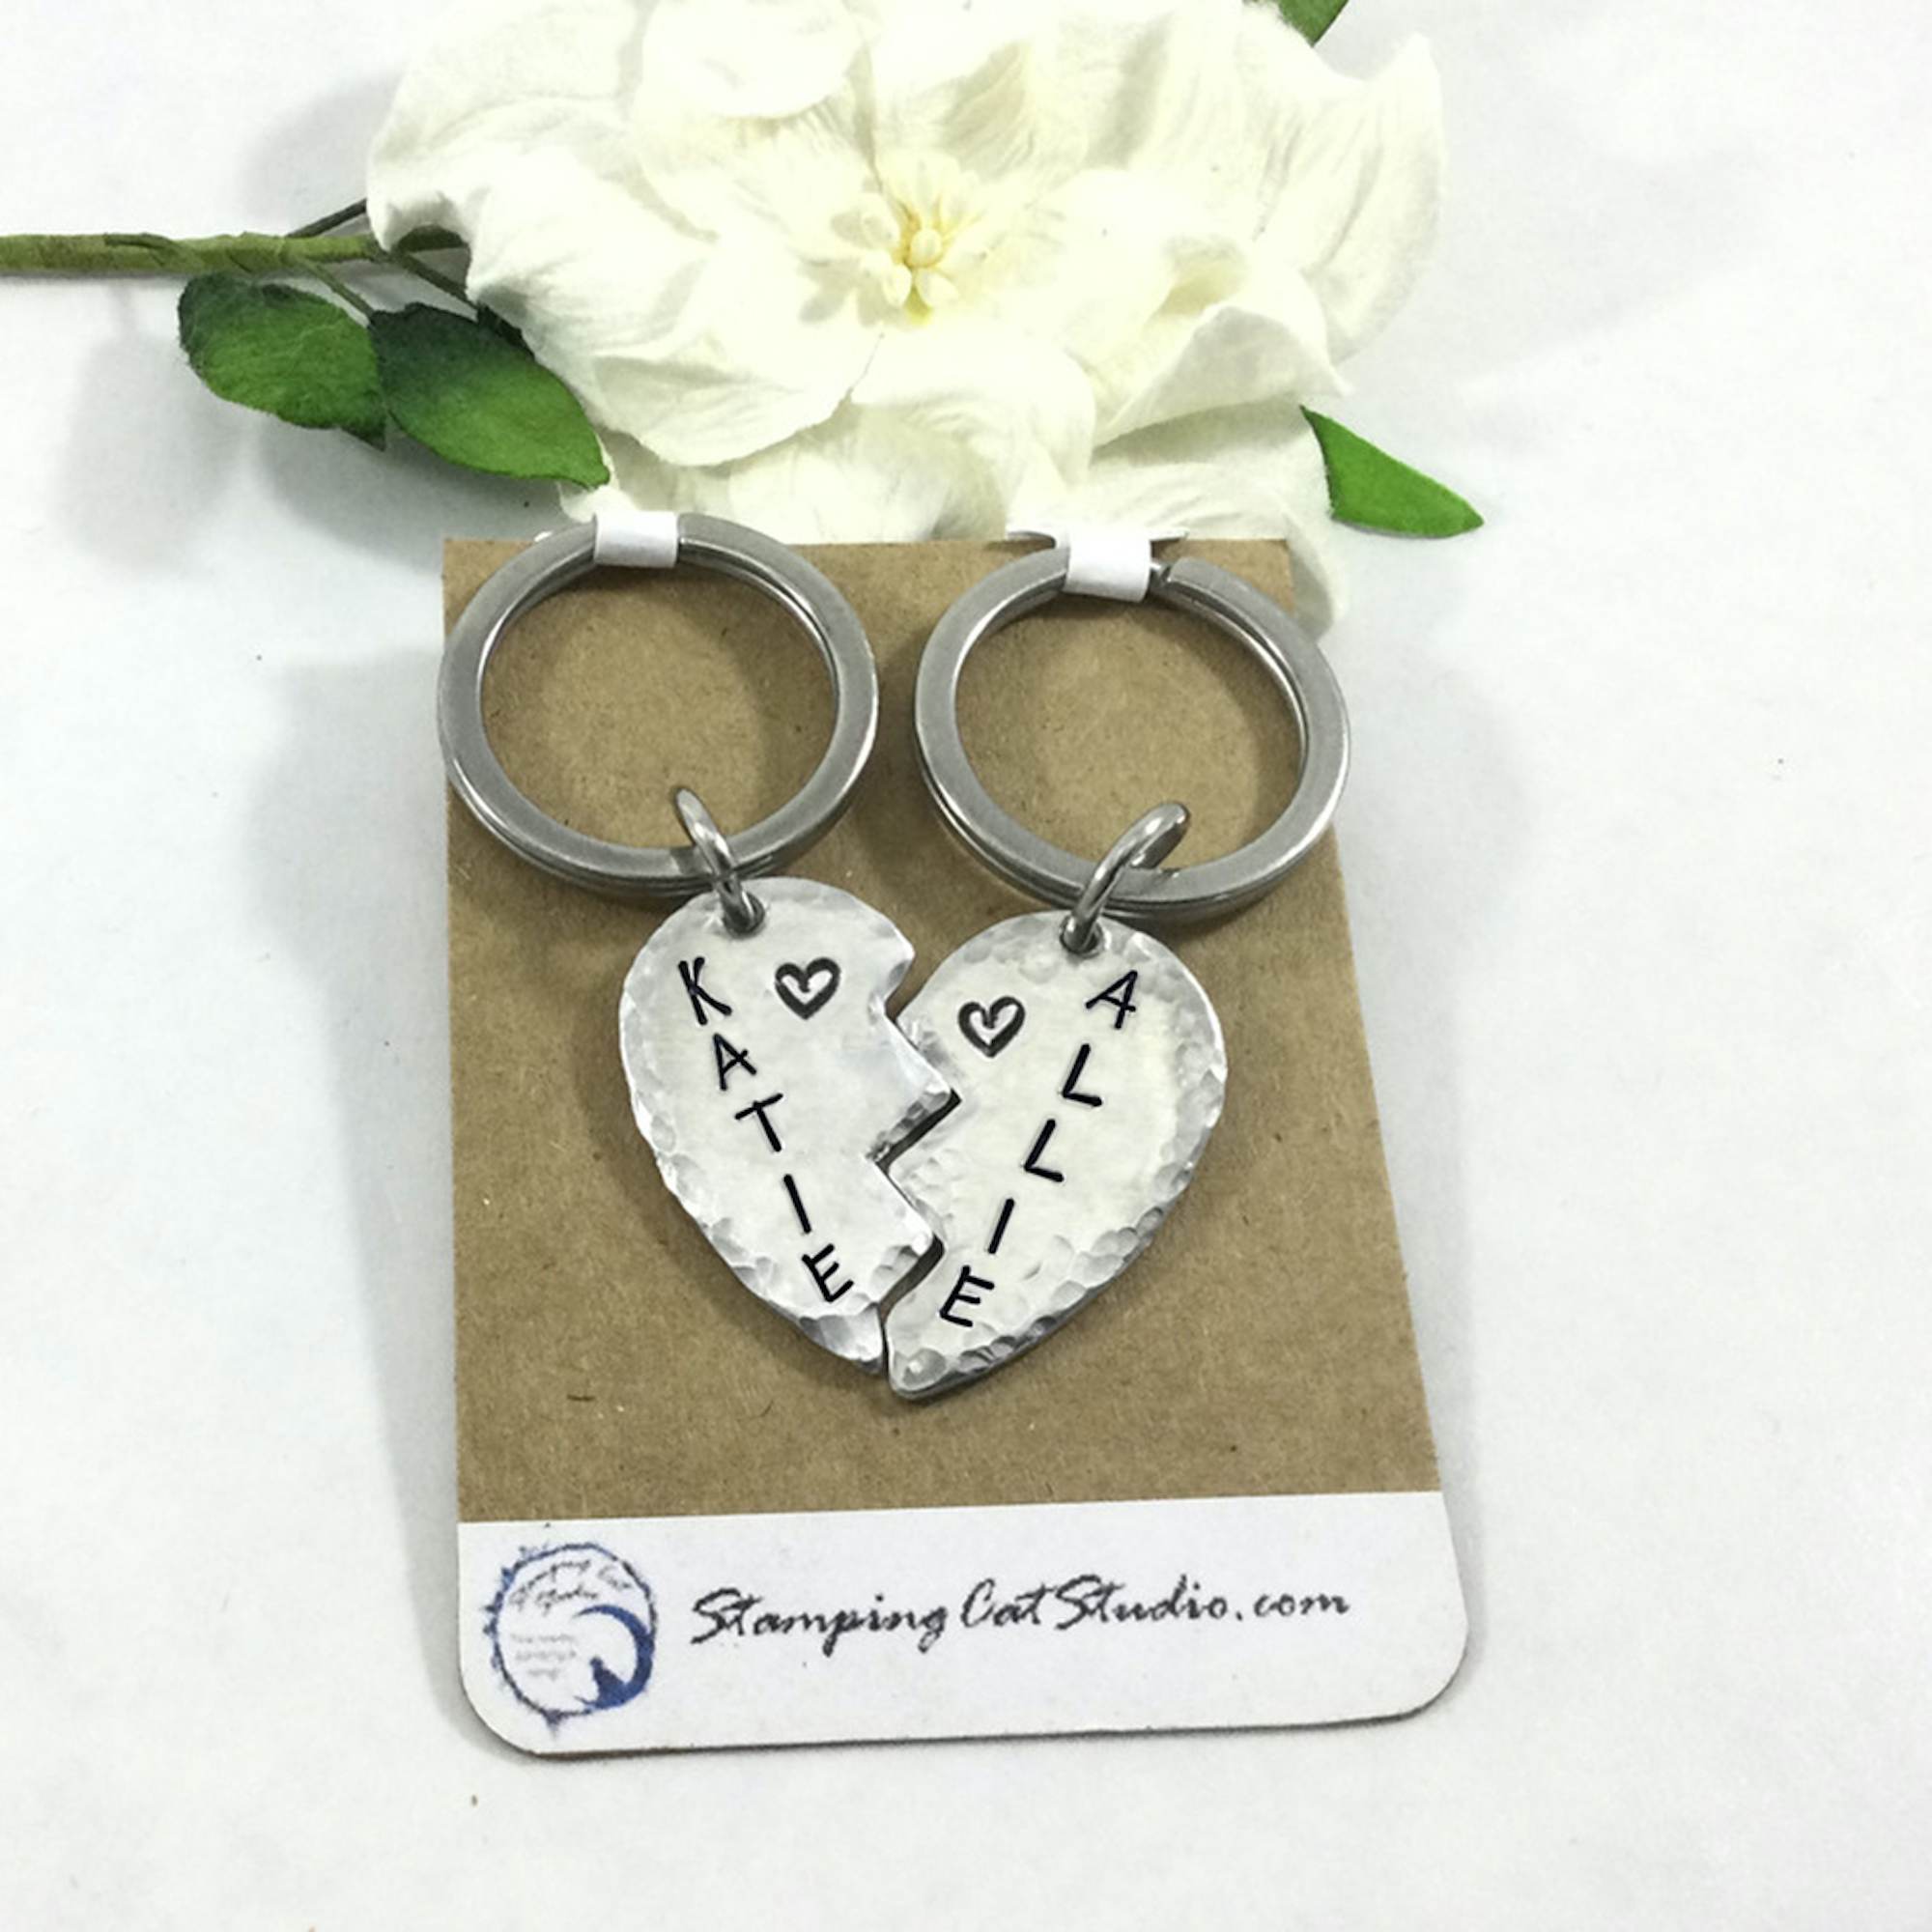 Southern Stamped Jewelry - You and your bff need this keychain set